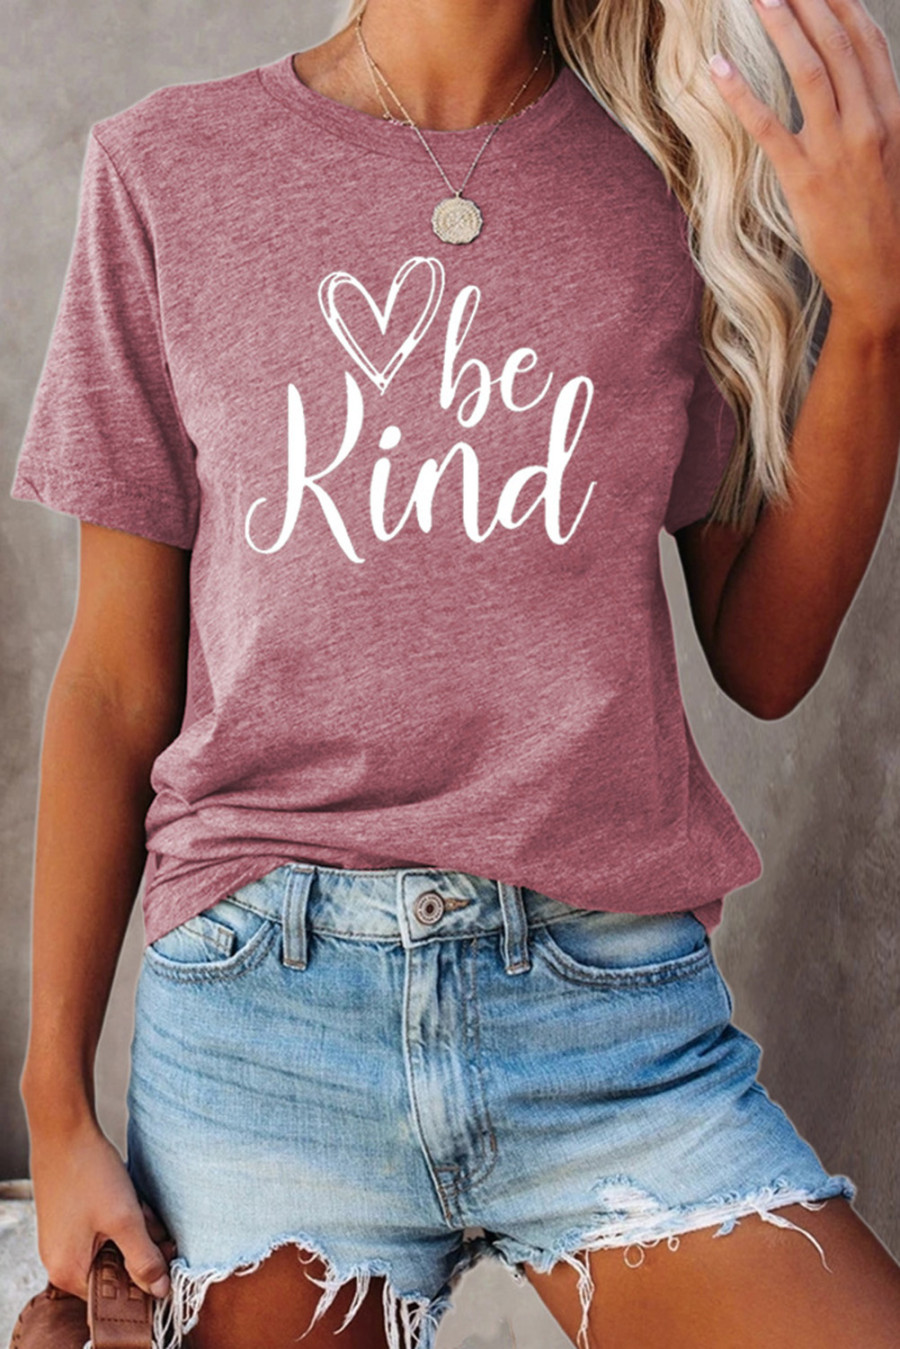 US$ 7.35 be kind Graphic Pink T-shirt Wholesale